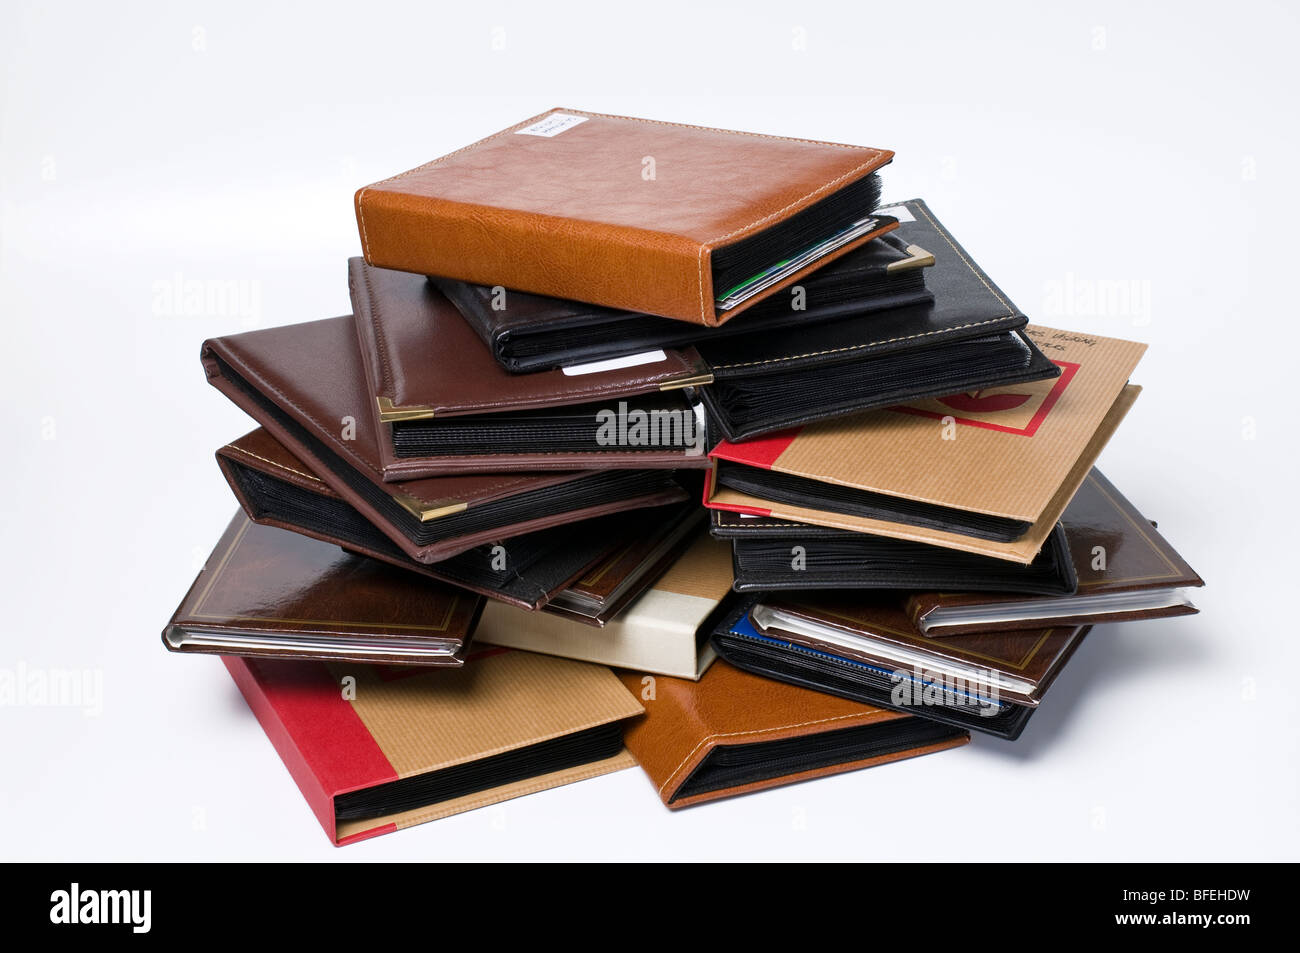 A pile of photograph albums Stock Photo